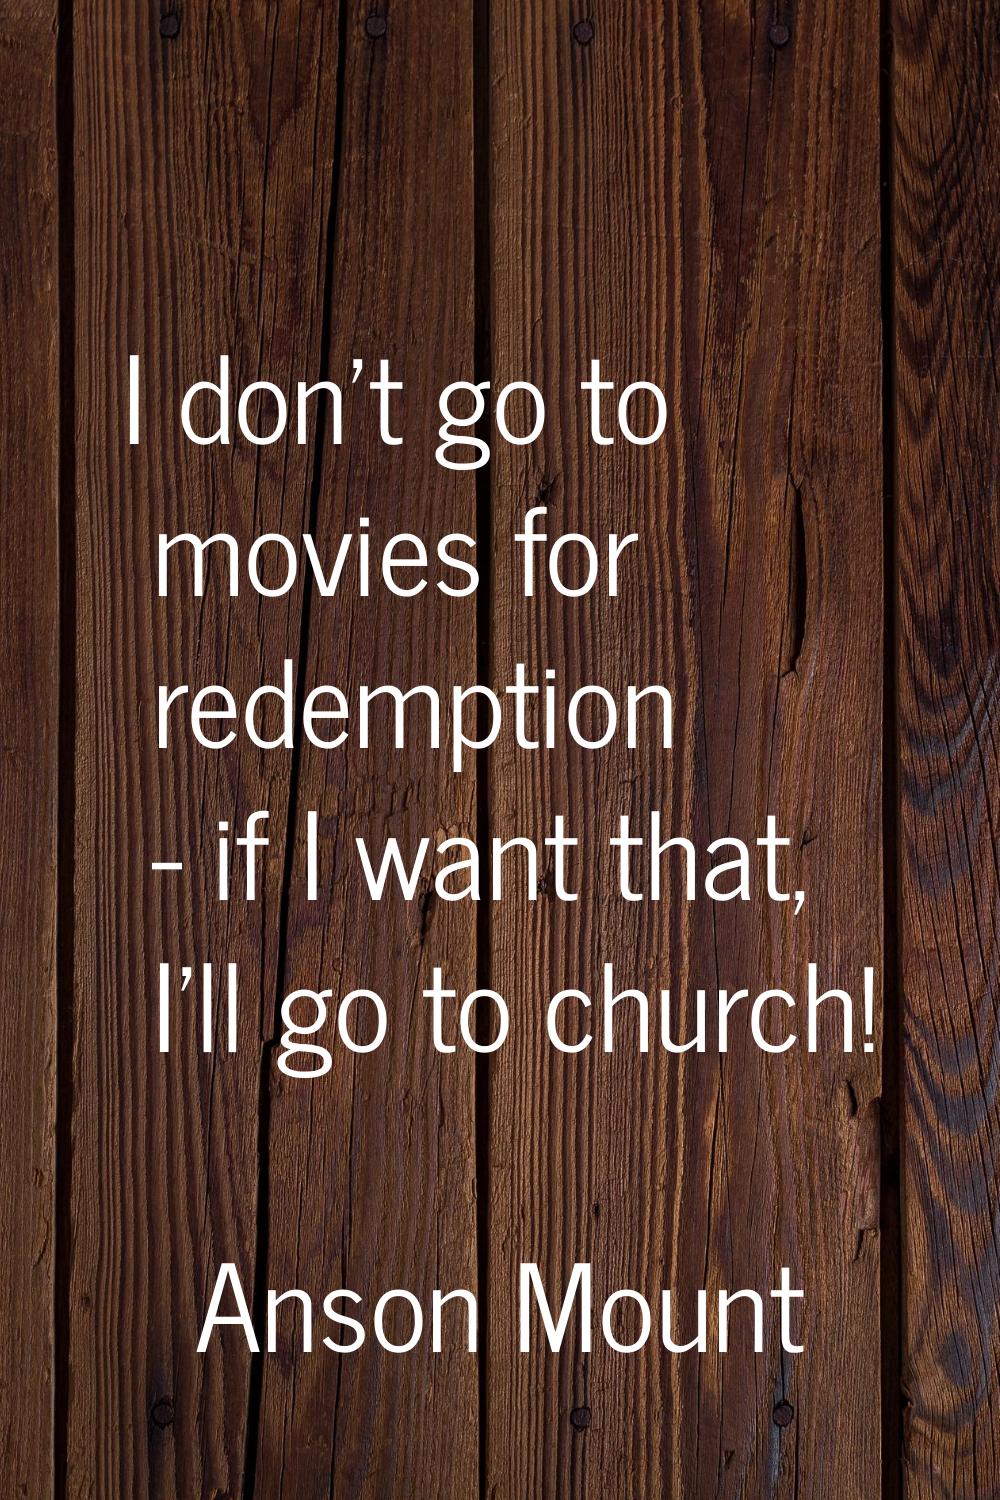 I don't go to movies for redemption - if I want that, I'll go to church!